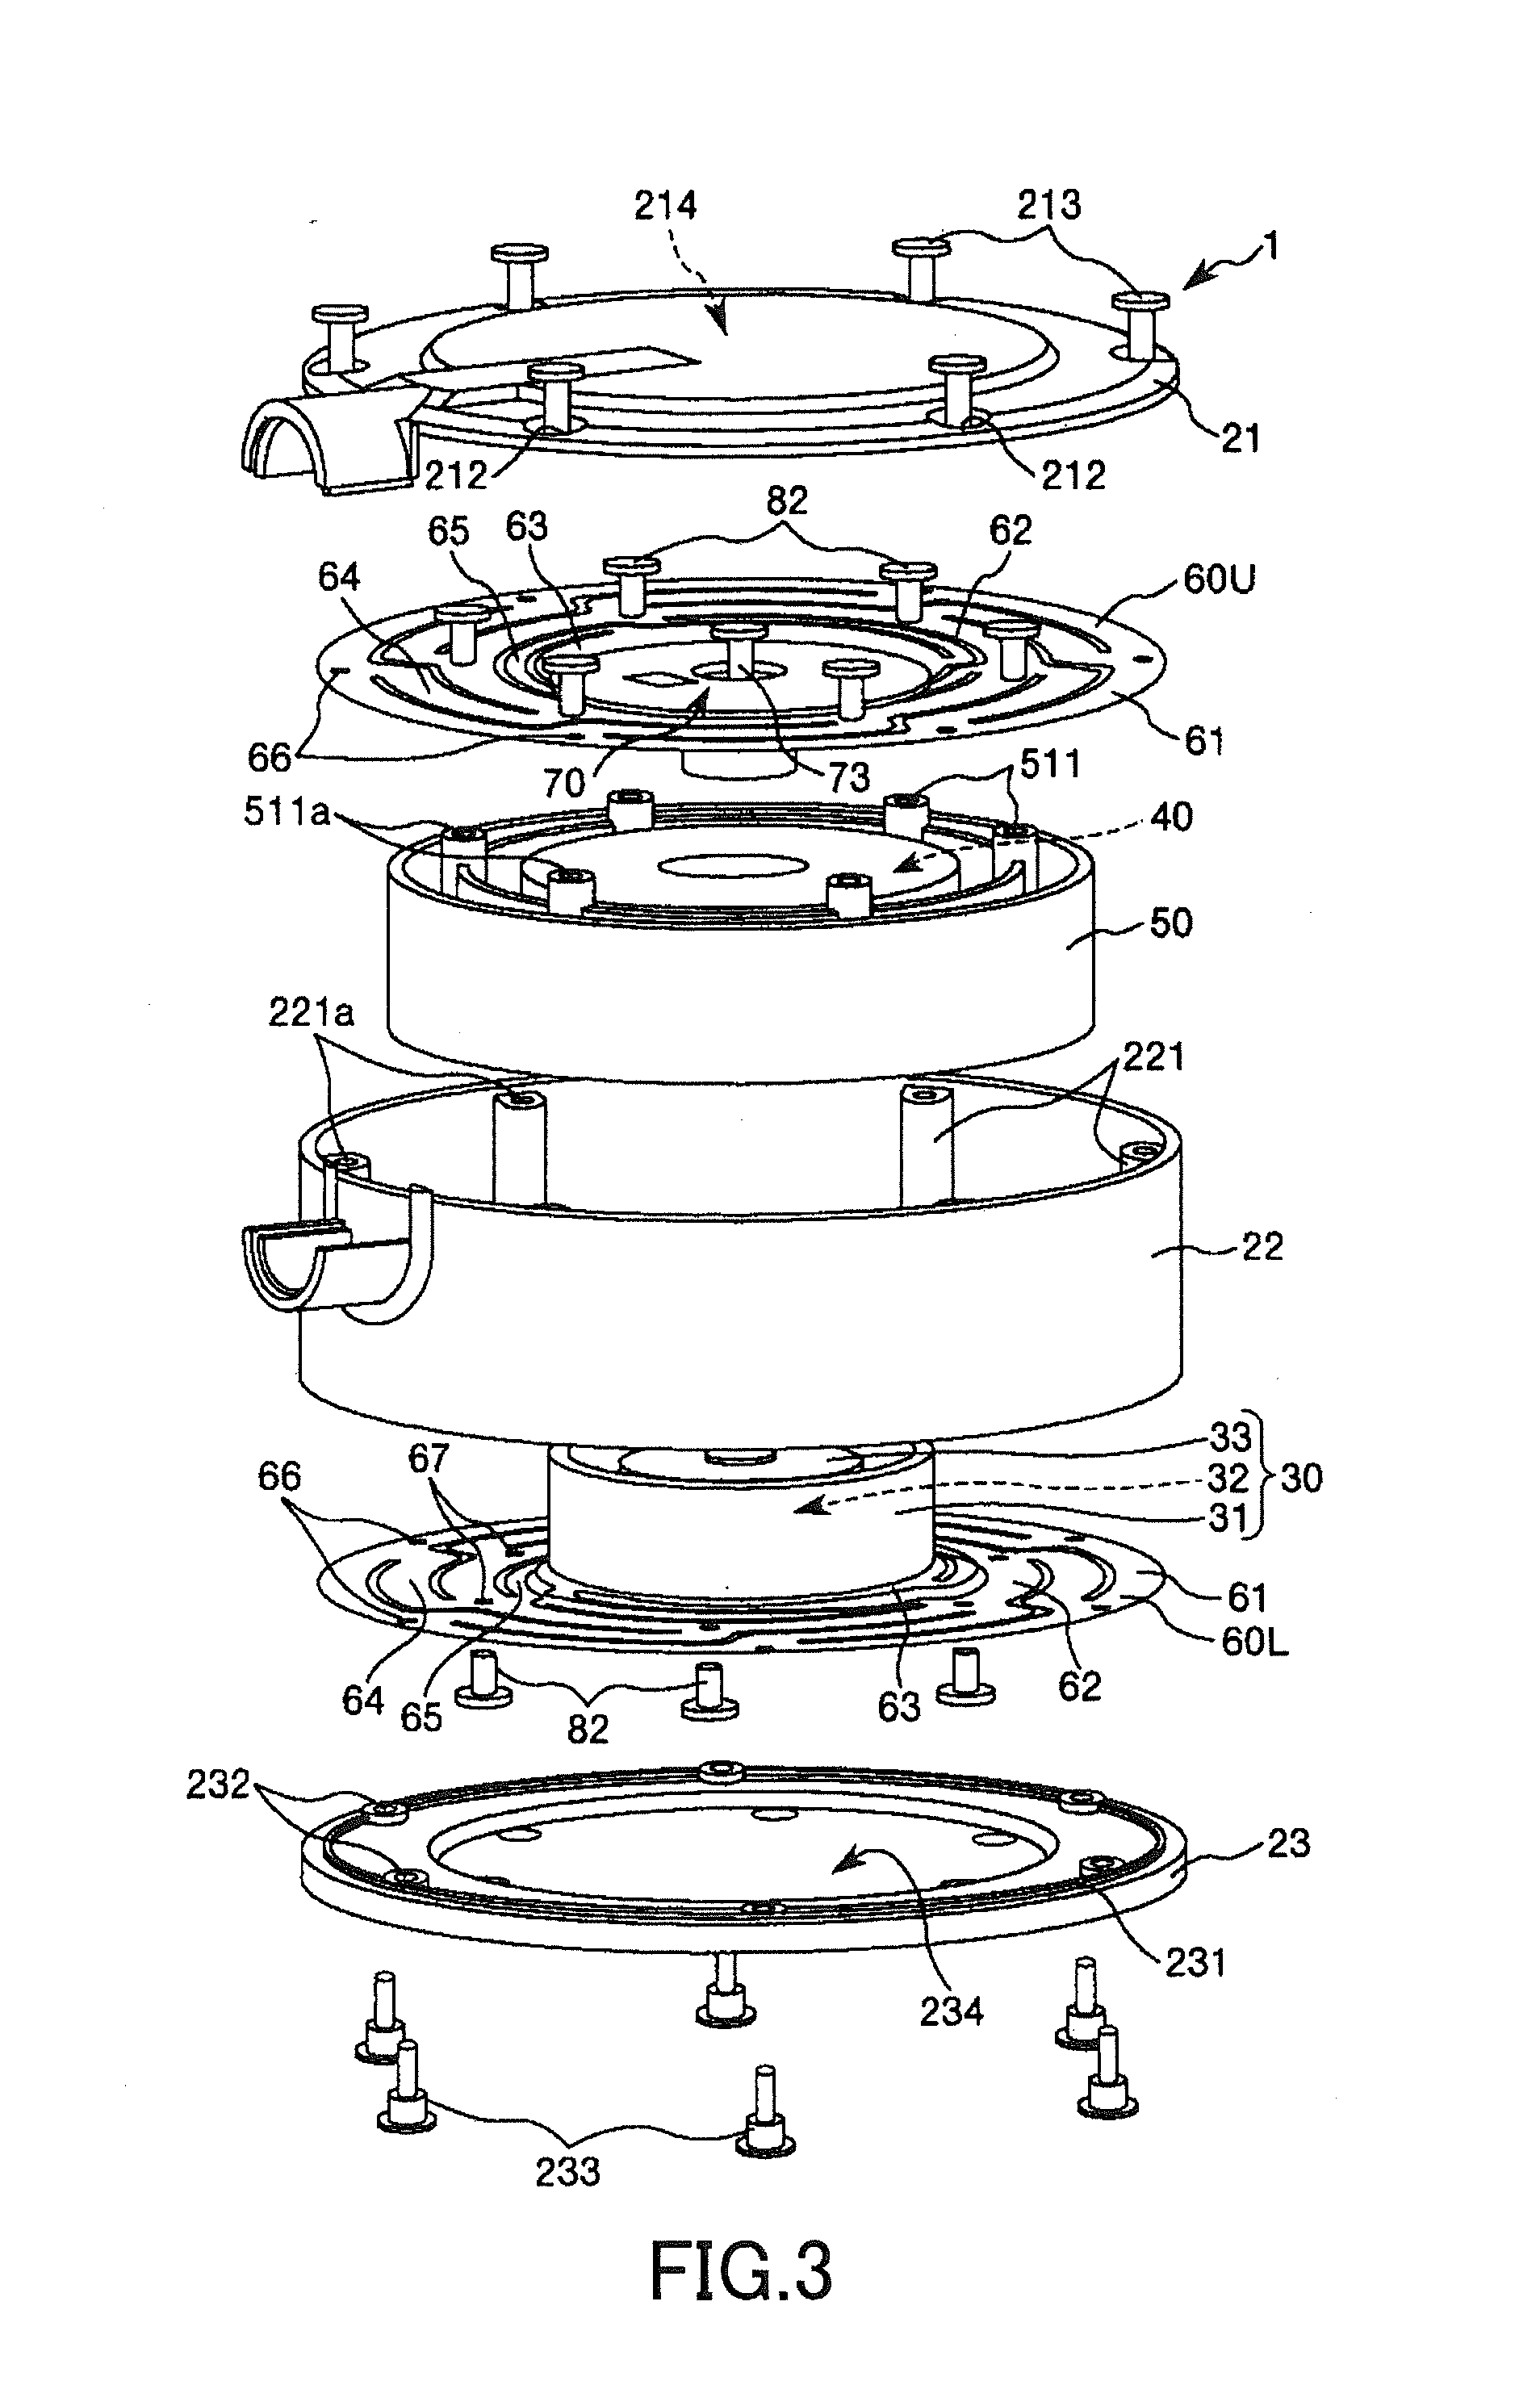 Power generator and power generating system